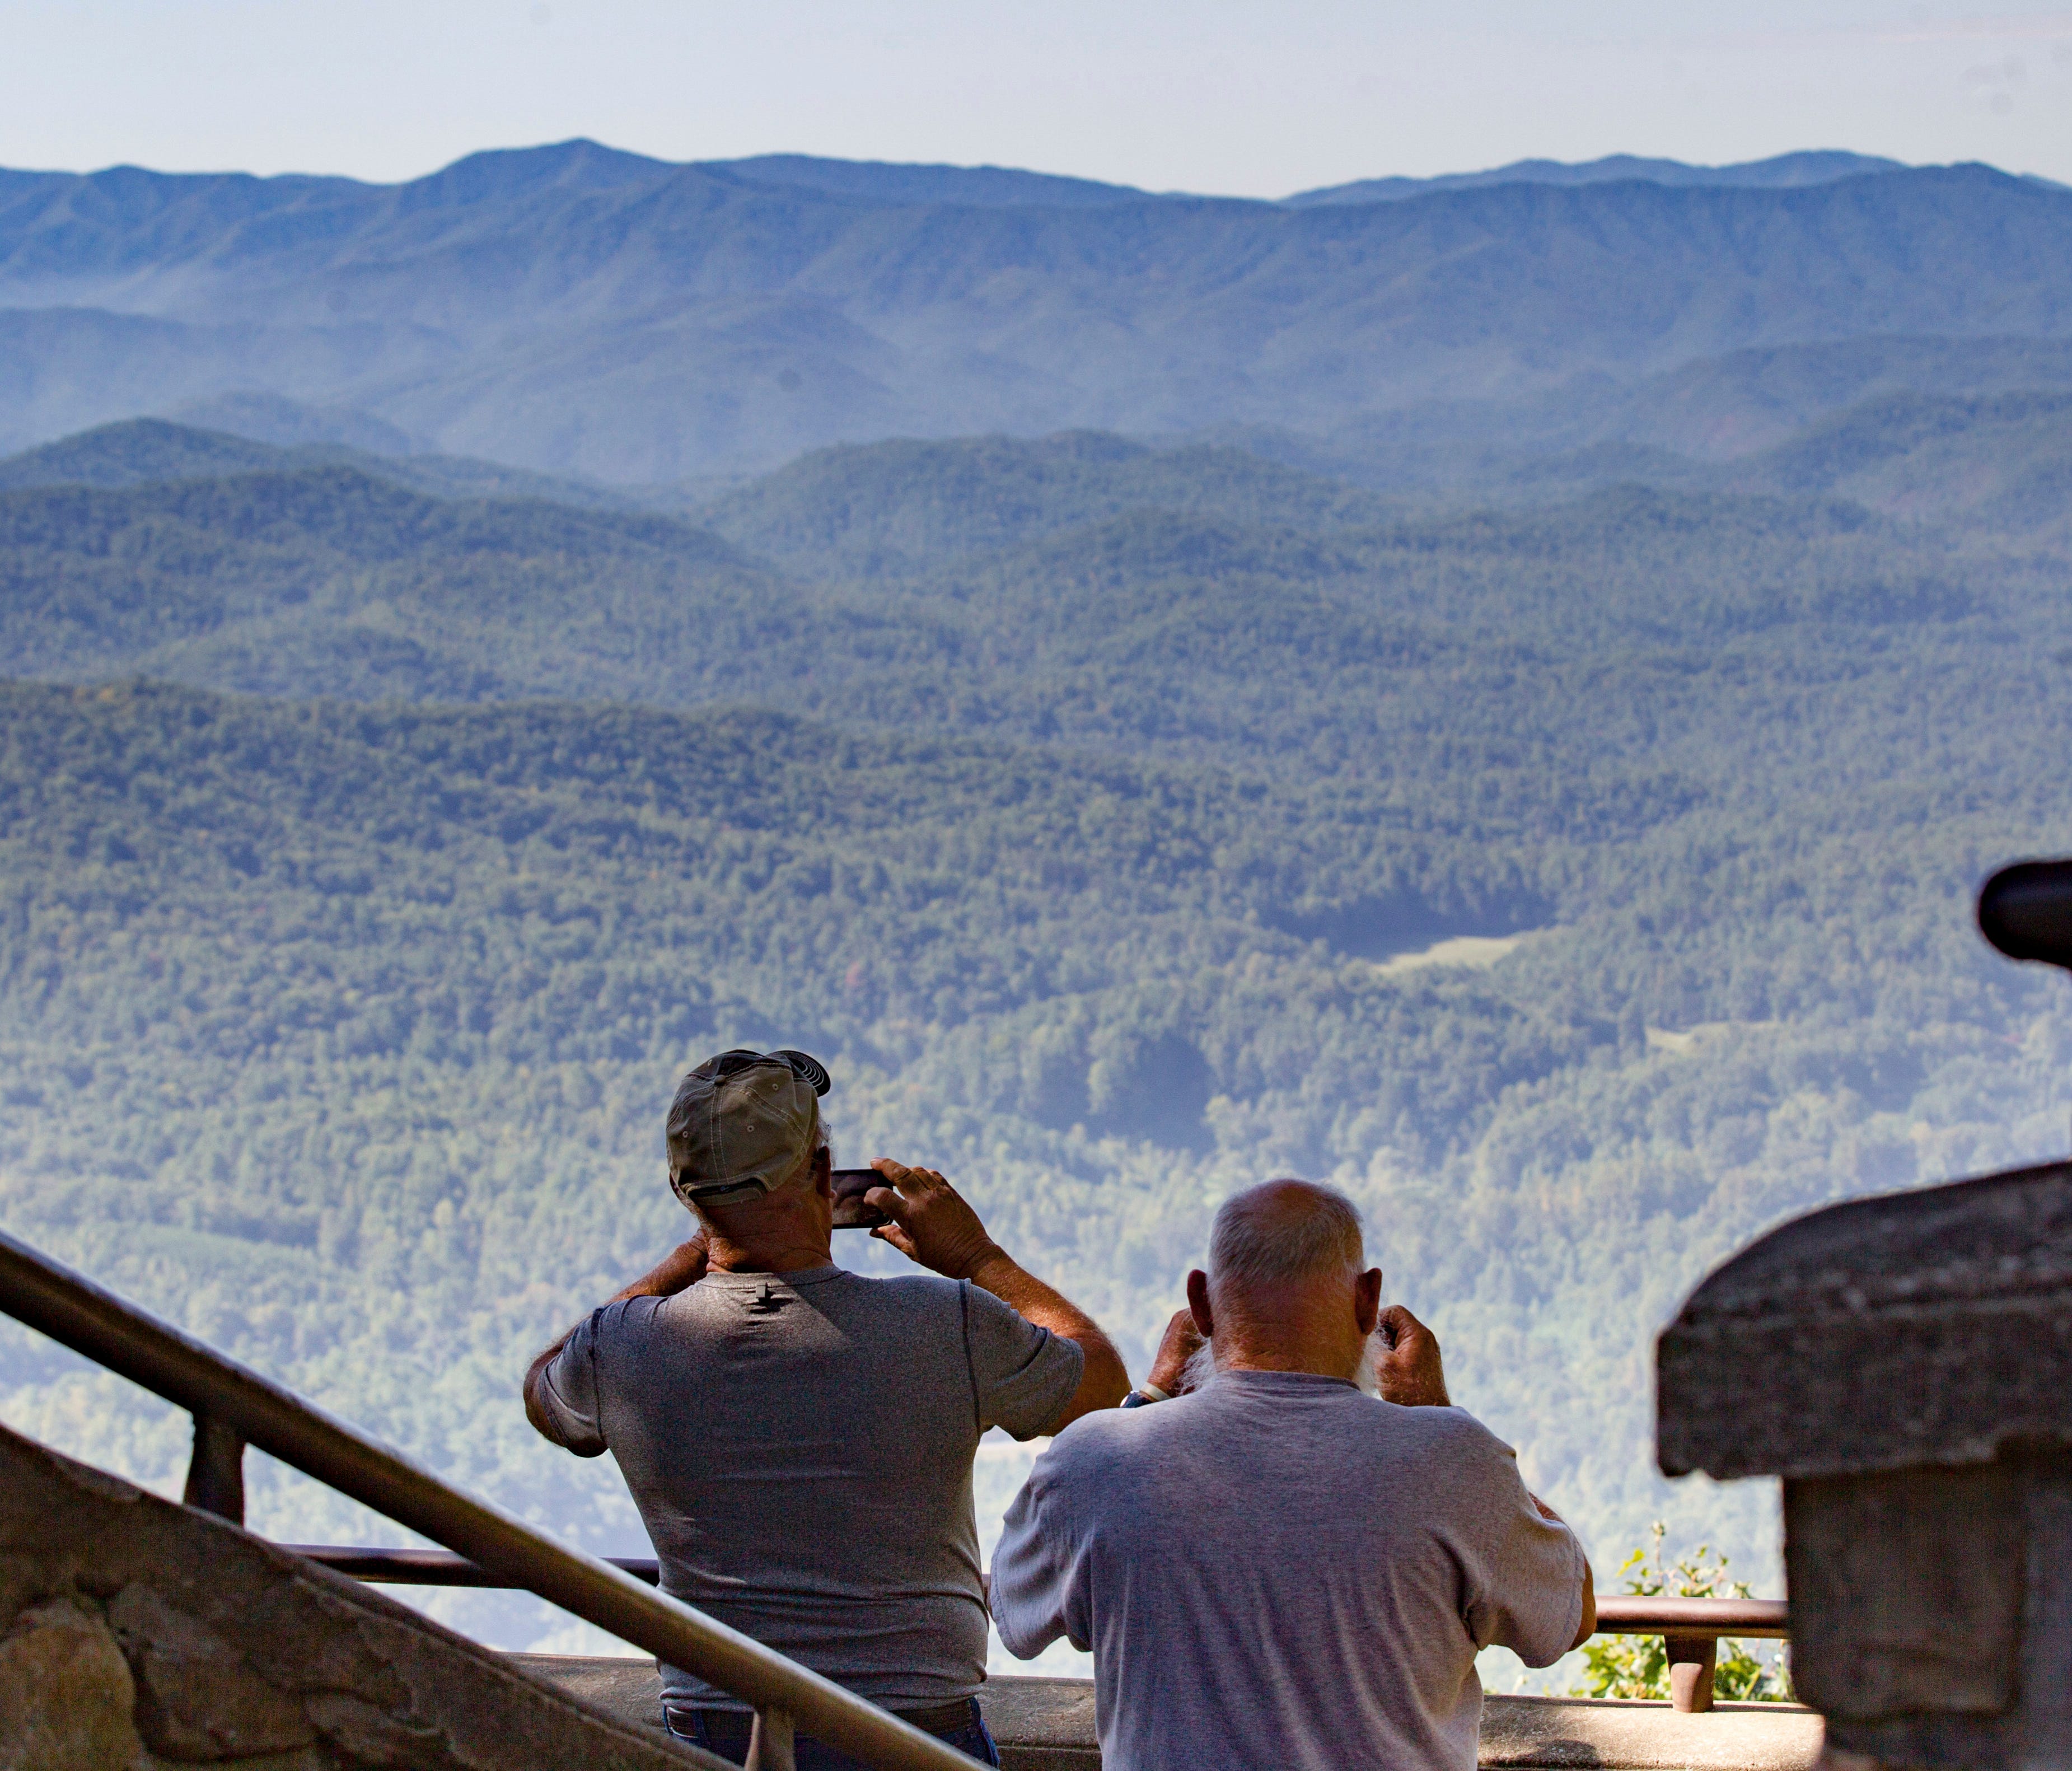 In this Sept. 15, 2016, photo, visitors take pictures of the Great Smoky Mountains National Park from a lookout point on the Foothills Parkway near Chilhowee, Tenn. Work is underway to complete the extension of scenic route running near the northern 